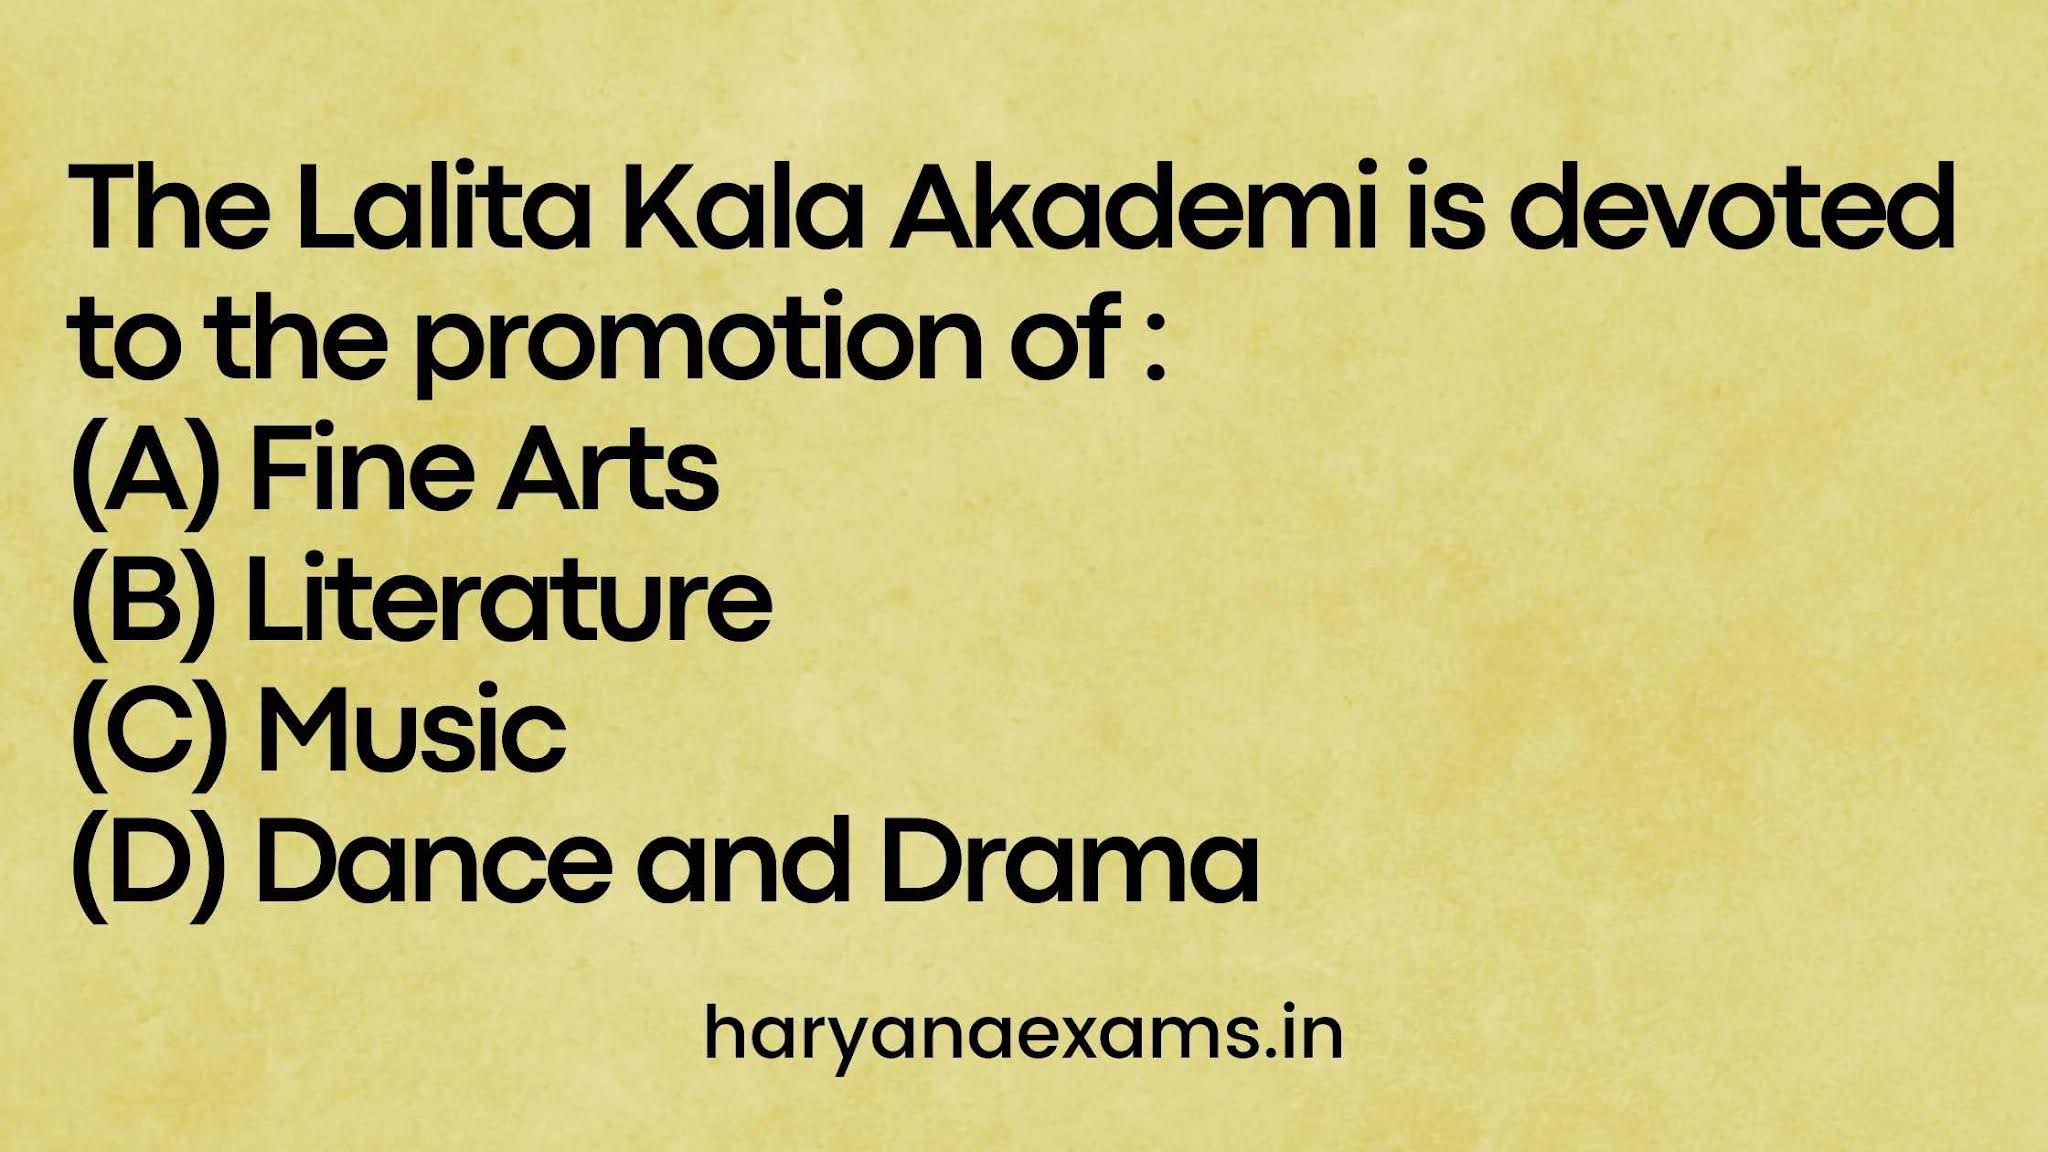 The Lalita Kala Akademi is devoted to the promotion of : (A) Fine Arts (B) Literature (C) Music (D) Dance and Drama